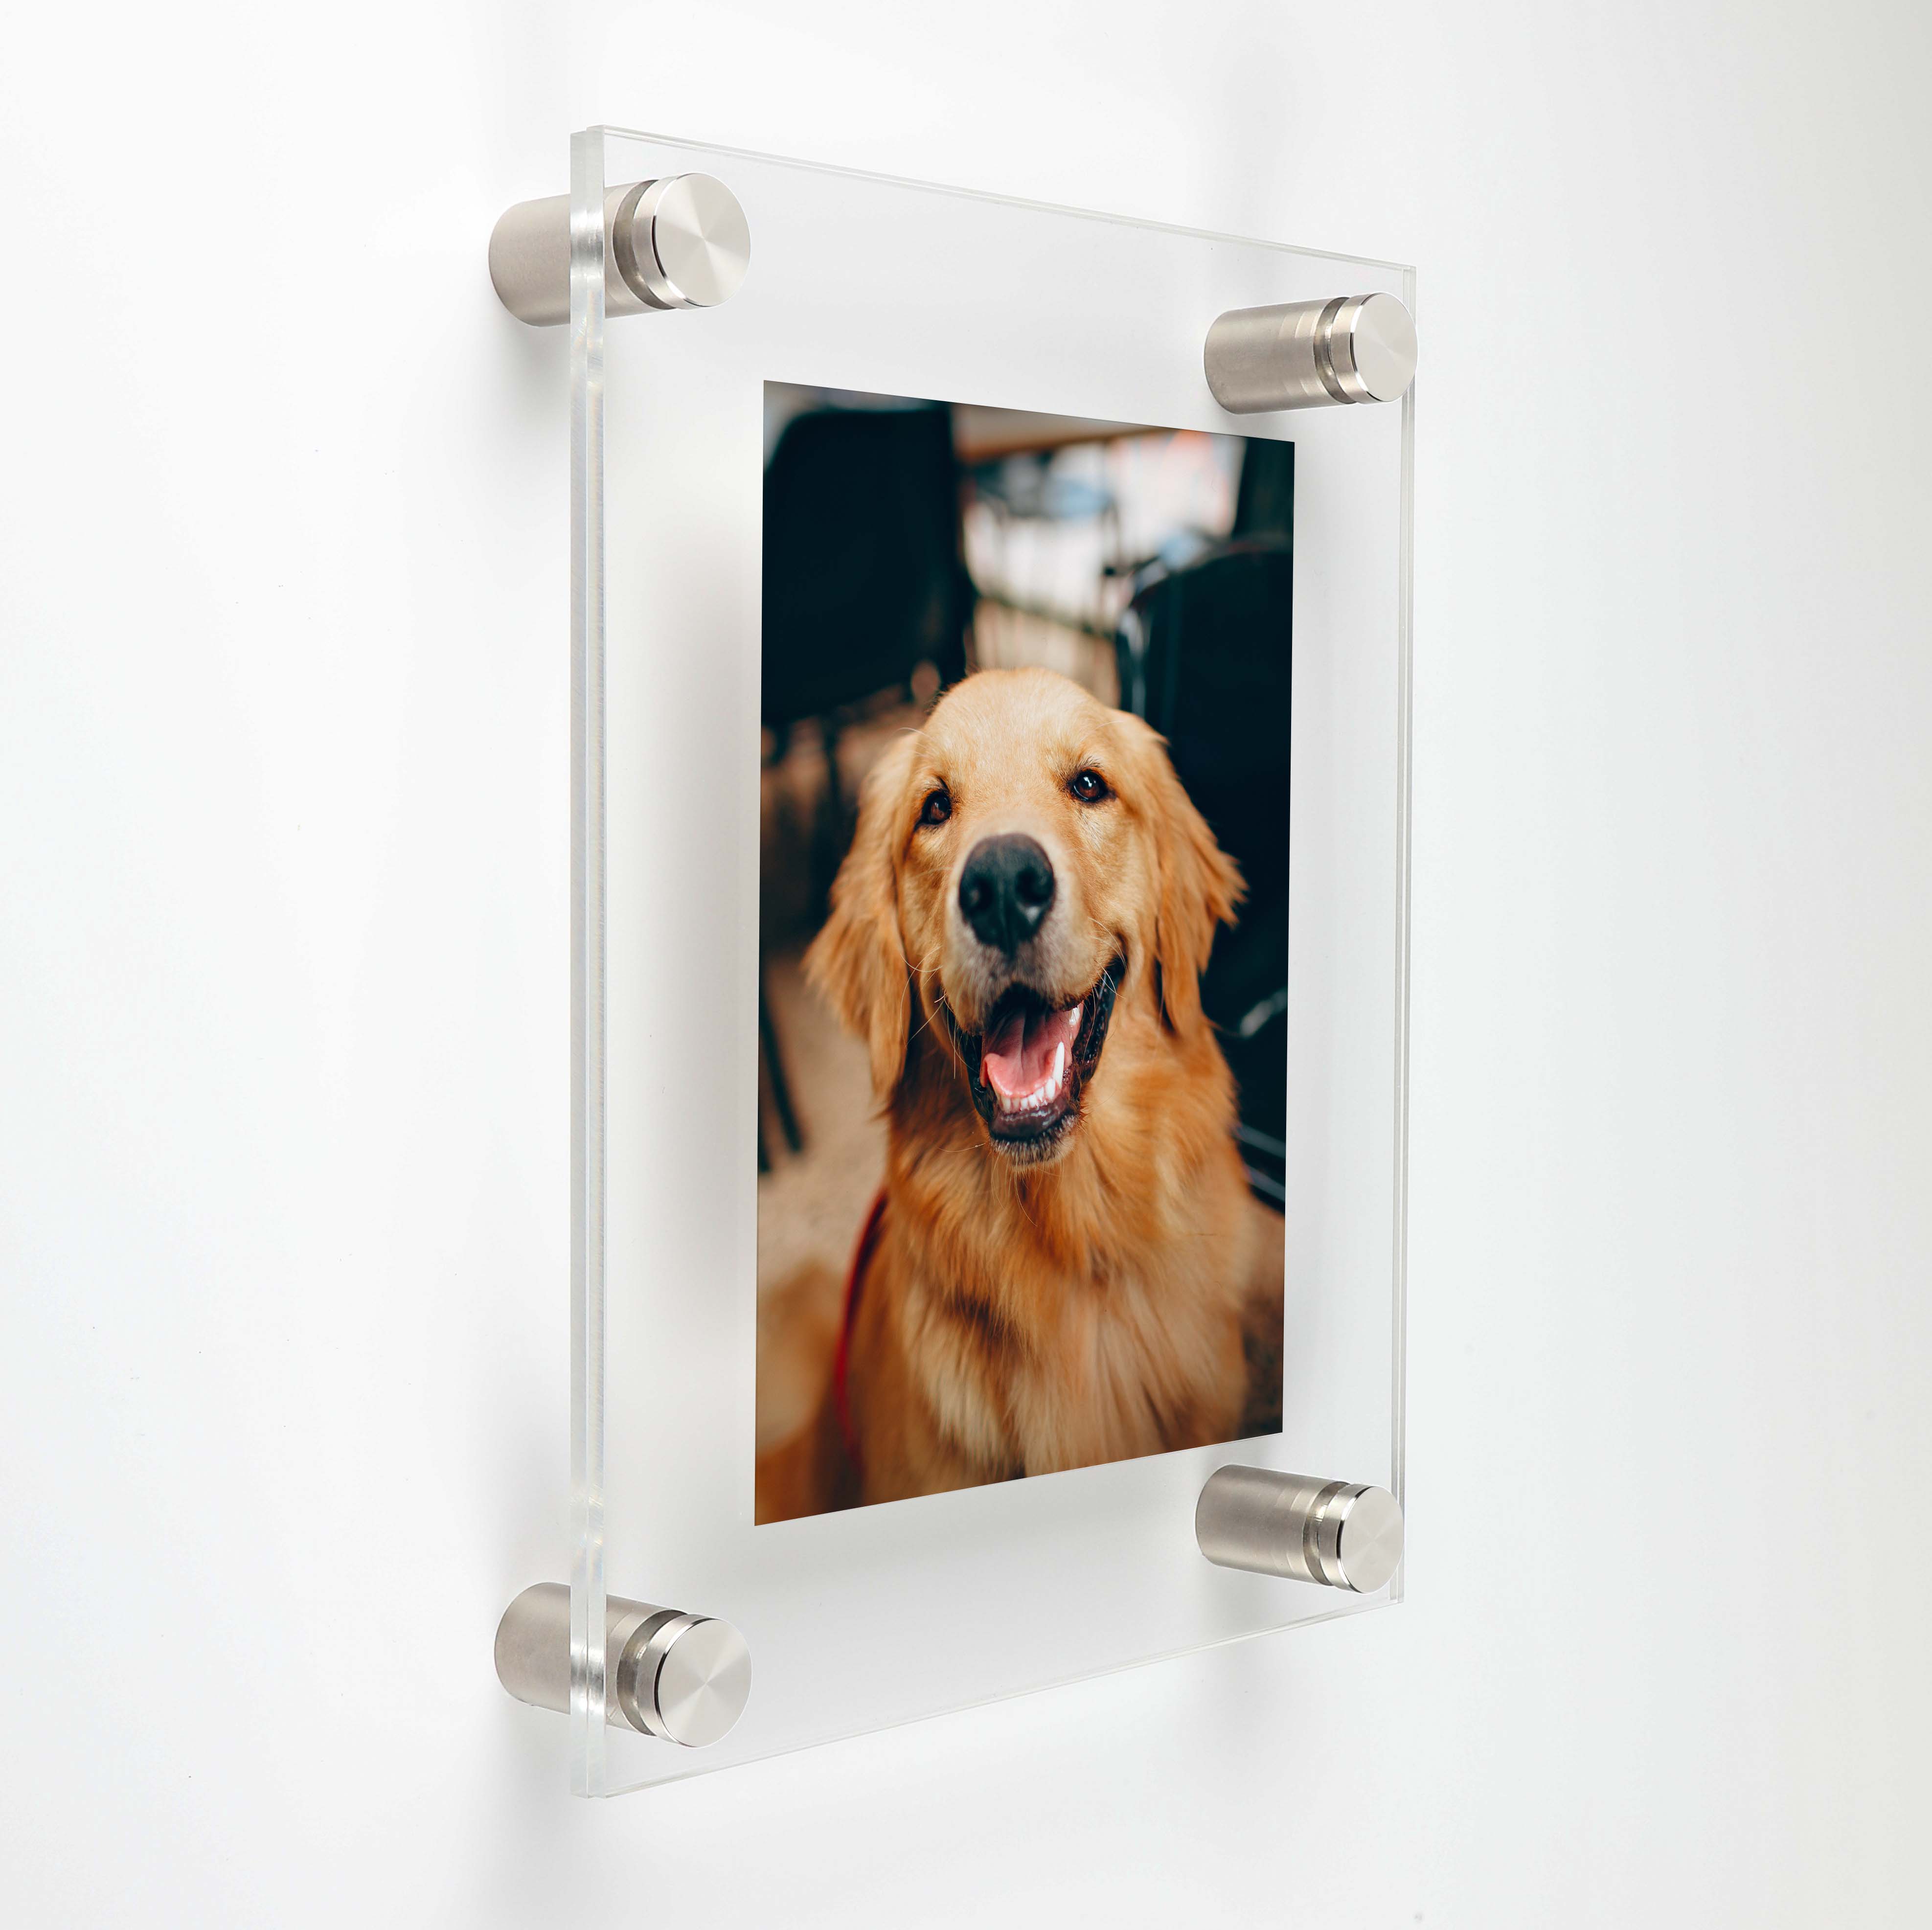 (2) 27'' x 39'' Clear Acrylics , Pre-Drilled With Polished Edges (Thick 3/16'' each), Wall Frame with (6) 3/4'' x 3/4'' Brushed Stainless Steel Standoffs includes Screws and Anchors